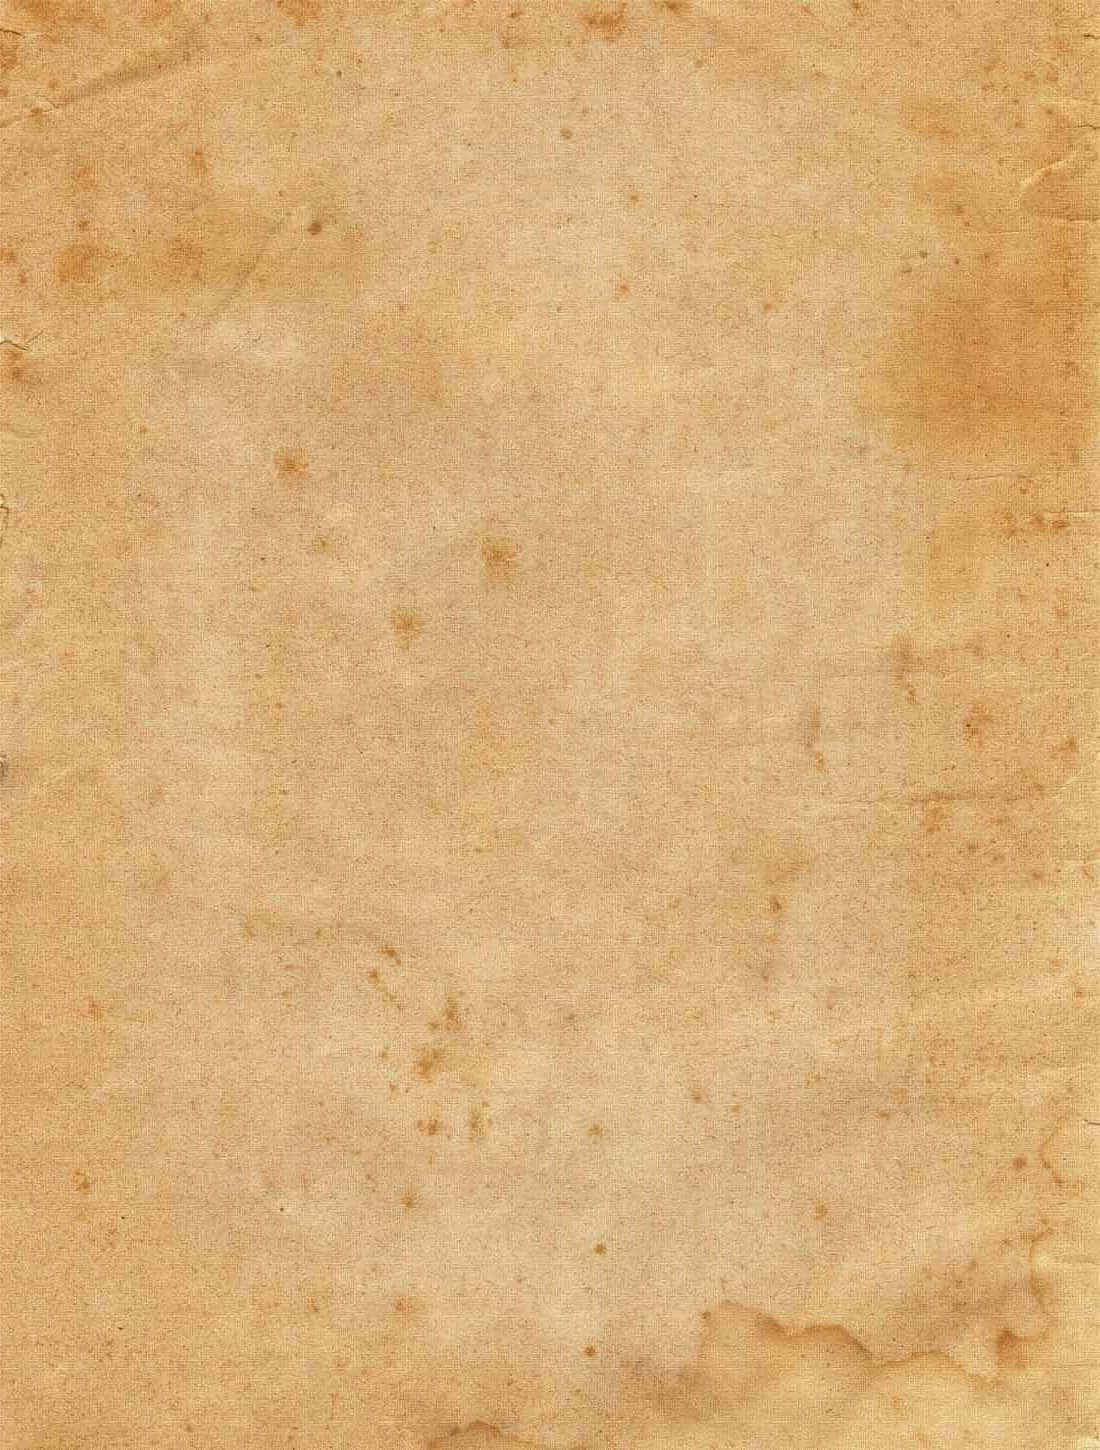 An Old Paper With A Brown Background